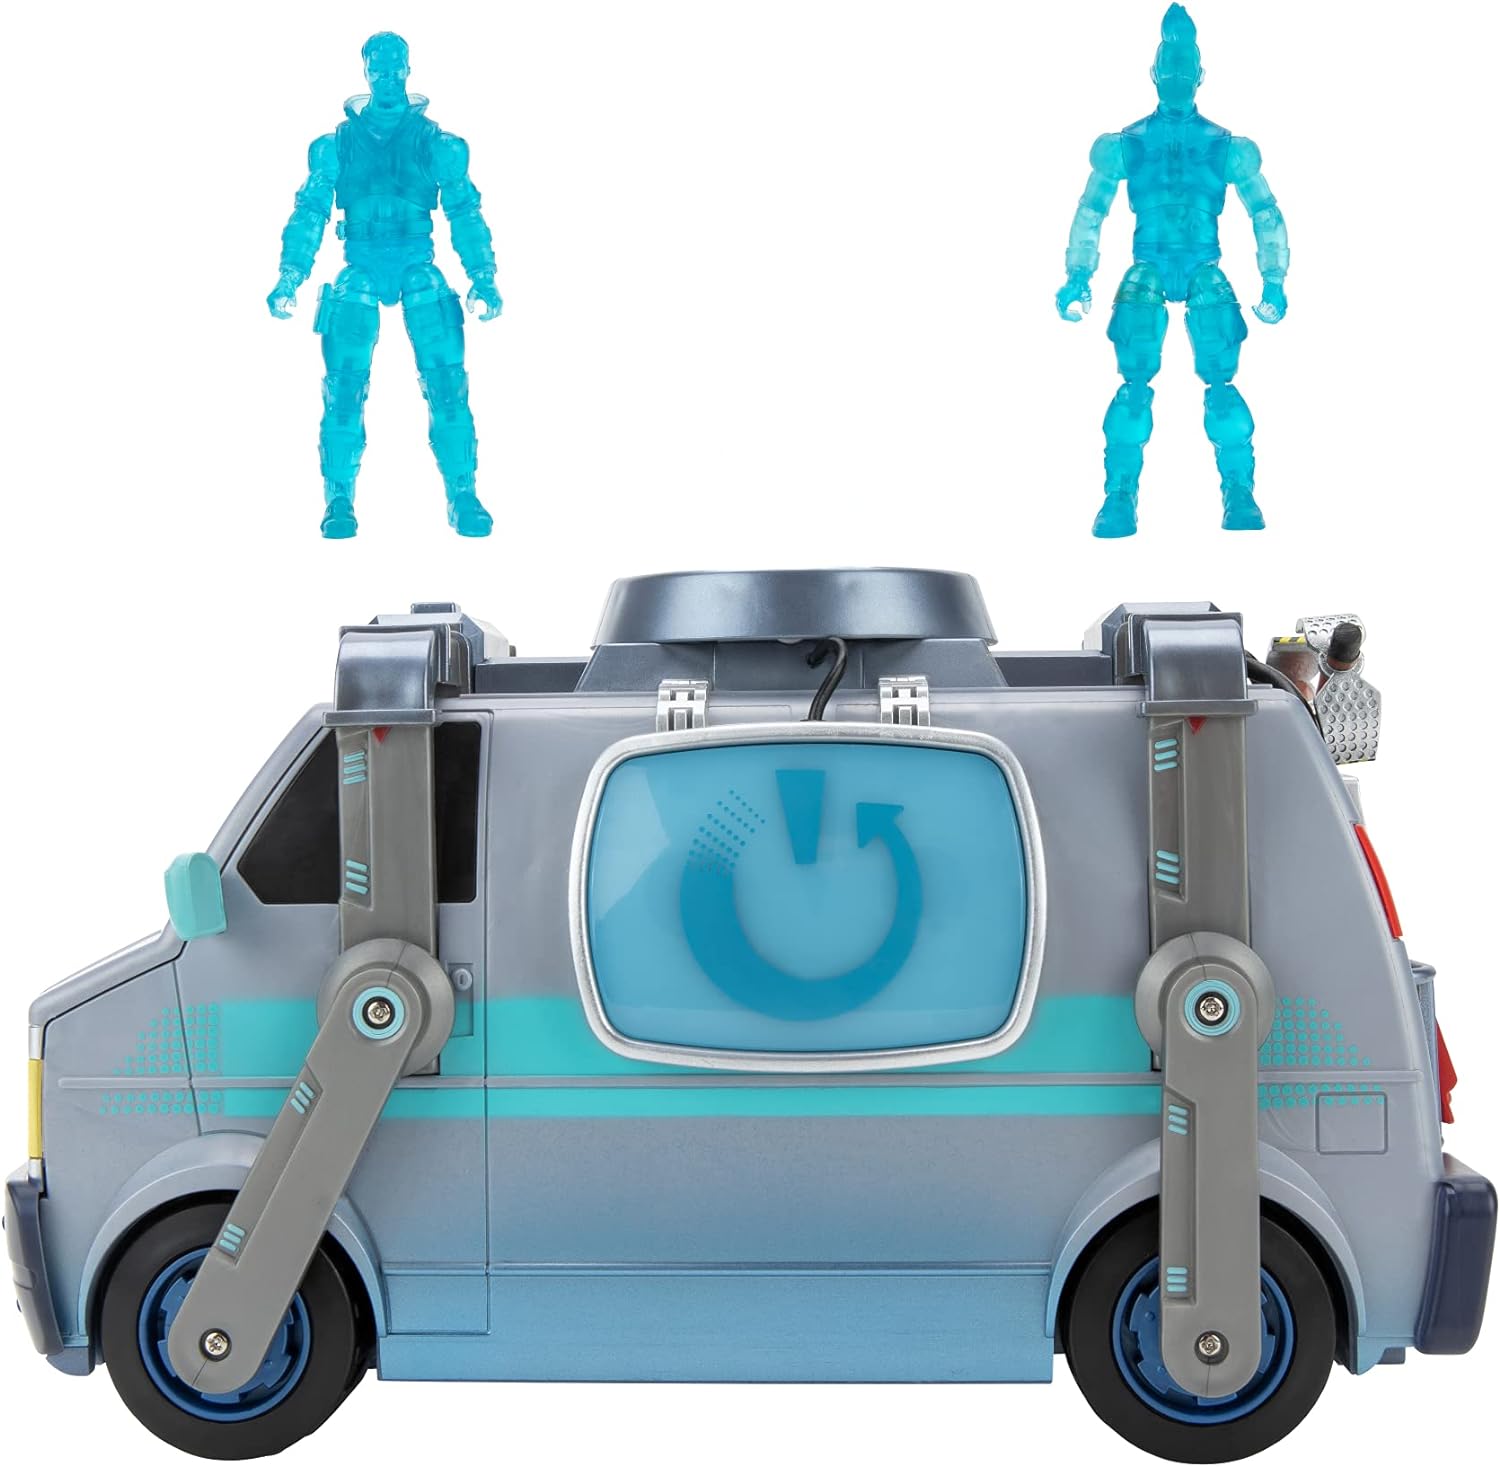 Fortnite FNT0897 Feature Deluxe Van, Electronic Vehicle with Two 4-inch Articulated Drift (Stage 1) and Reboot Recruit Jonesy Figures, and Accessory, Multi - Amazon Exclusive